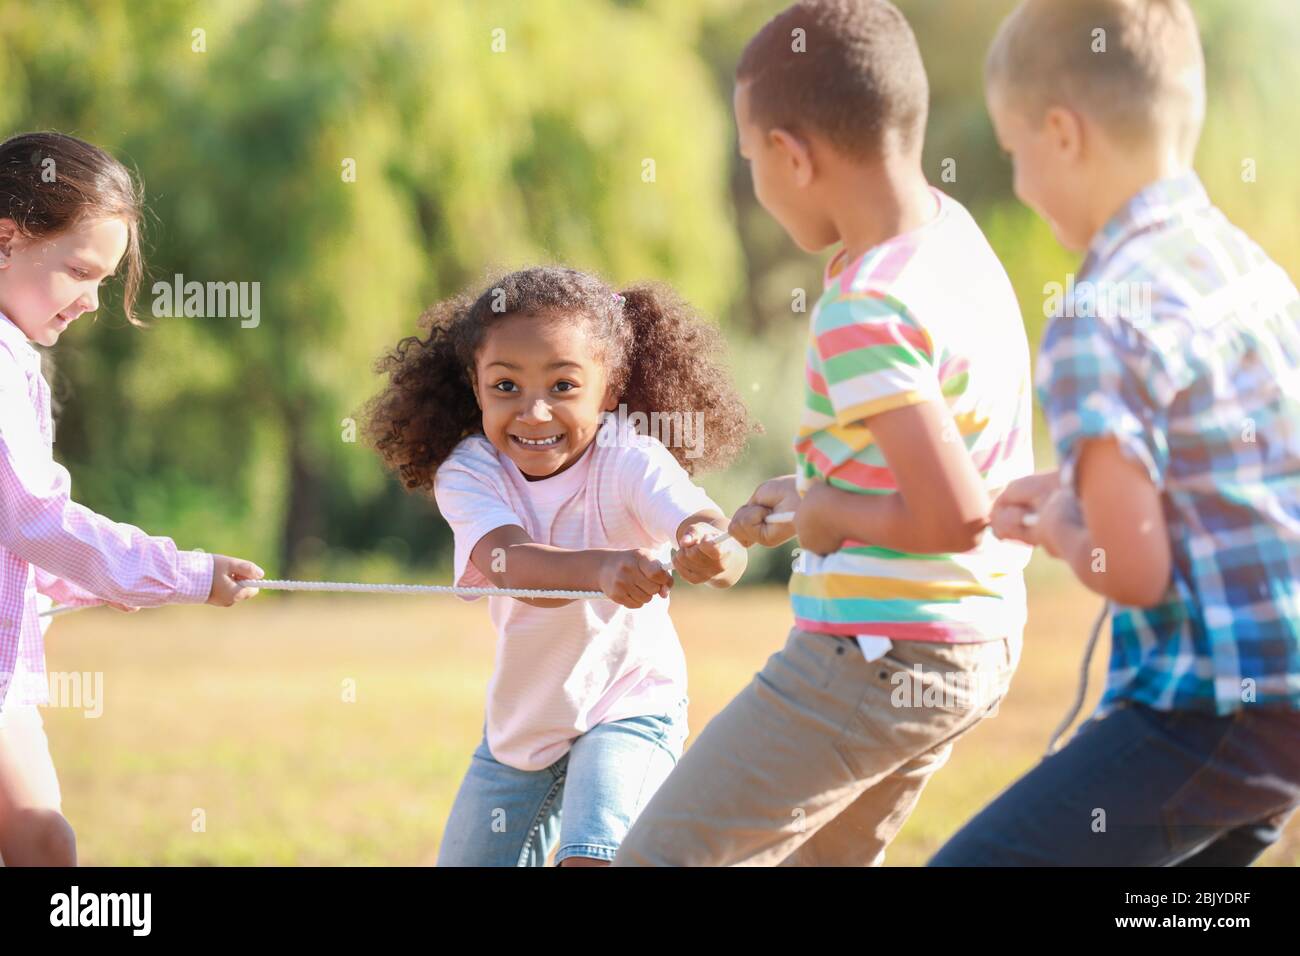 Group of little children pulling rope in park Stock Photo - Alamy